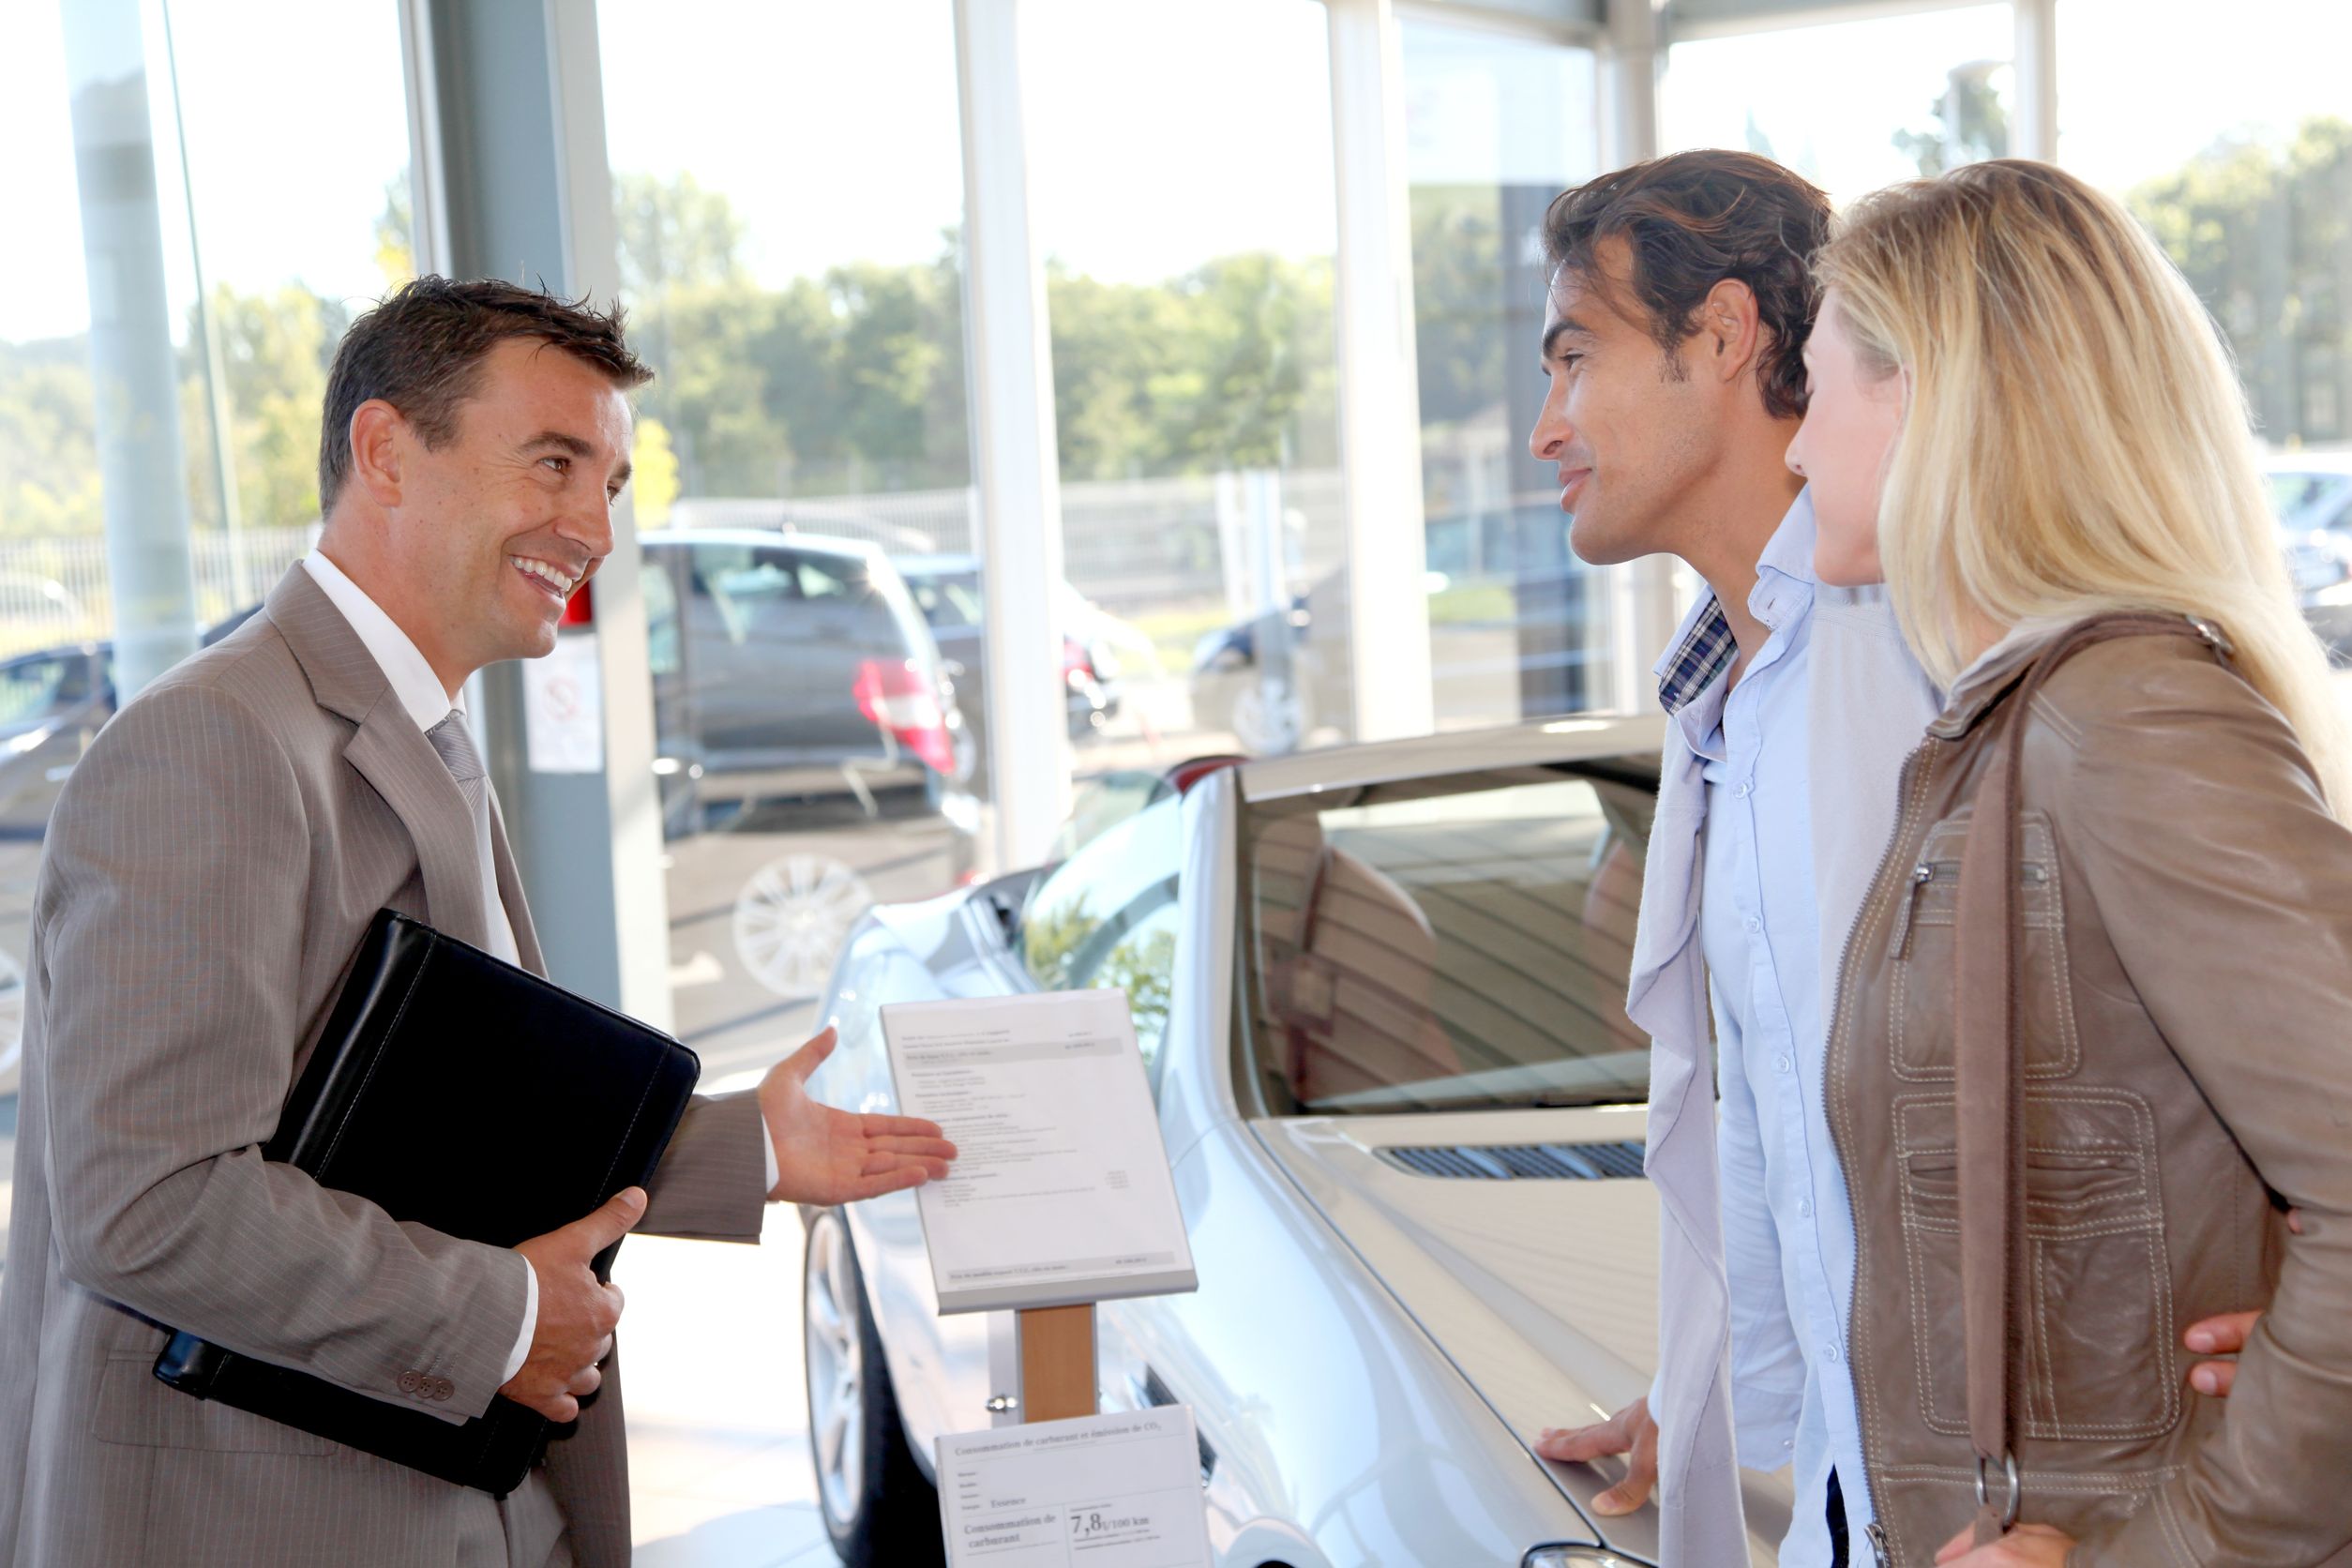 It’s Easier to Find an Ideal Vehicle When Visiting a Lauded Used Car Dealer in Fredericksburg, VA